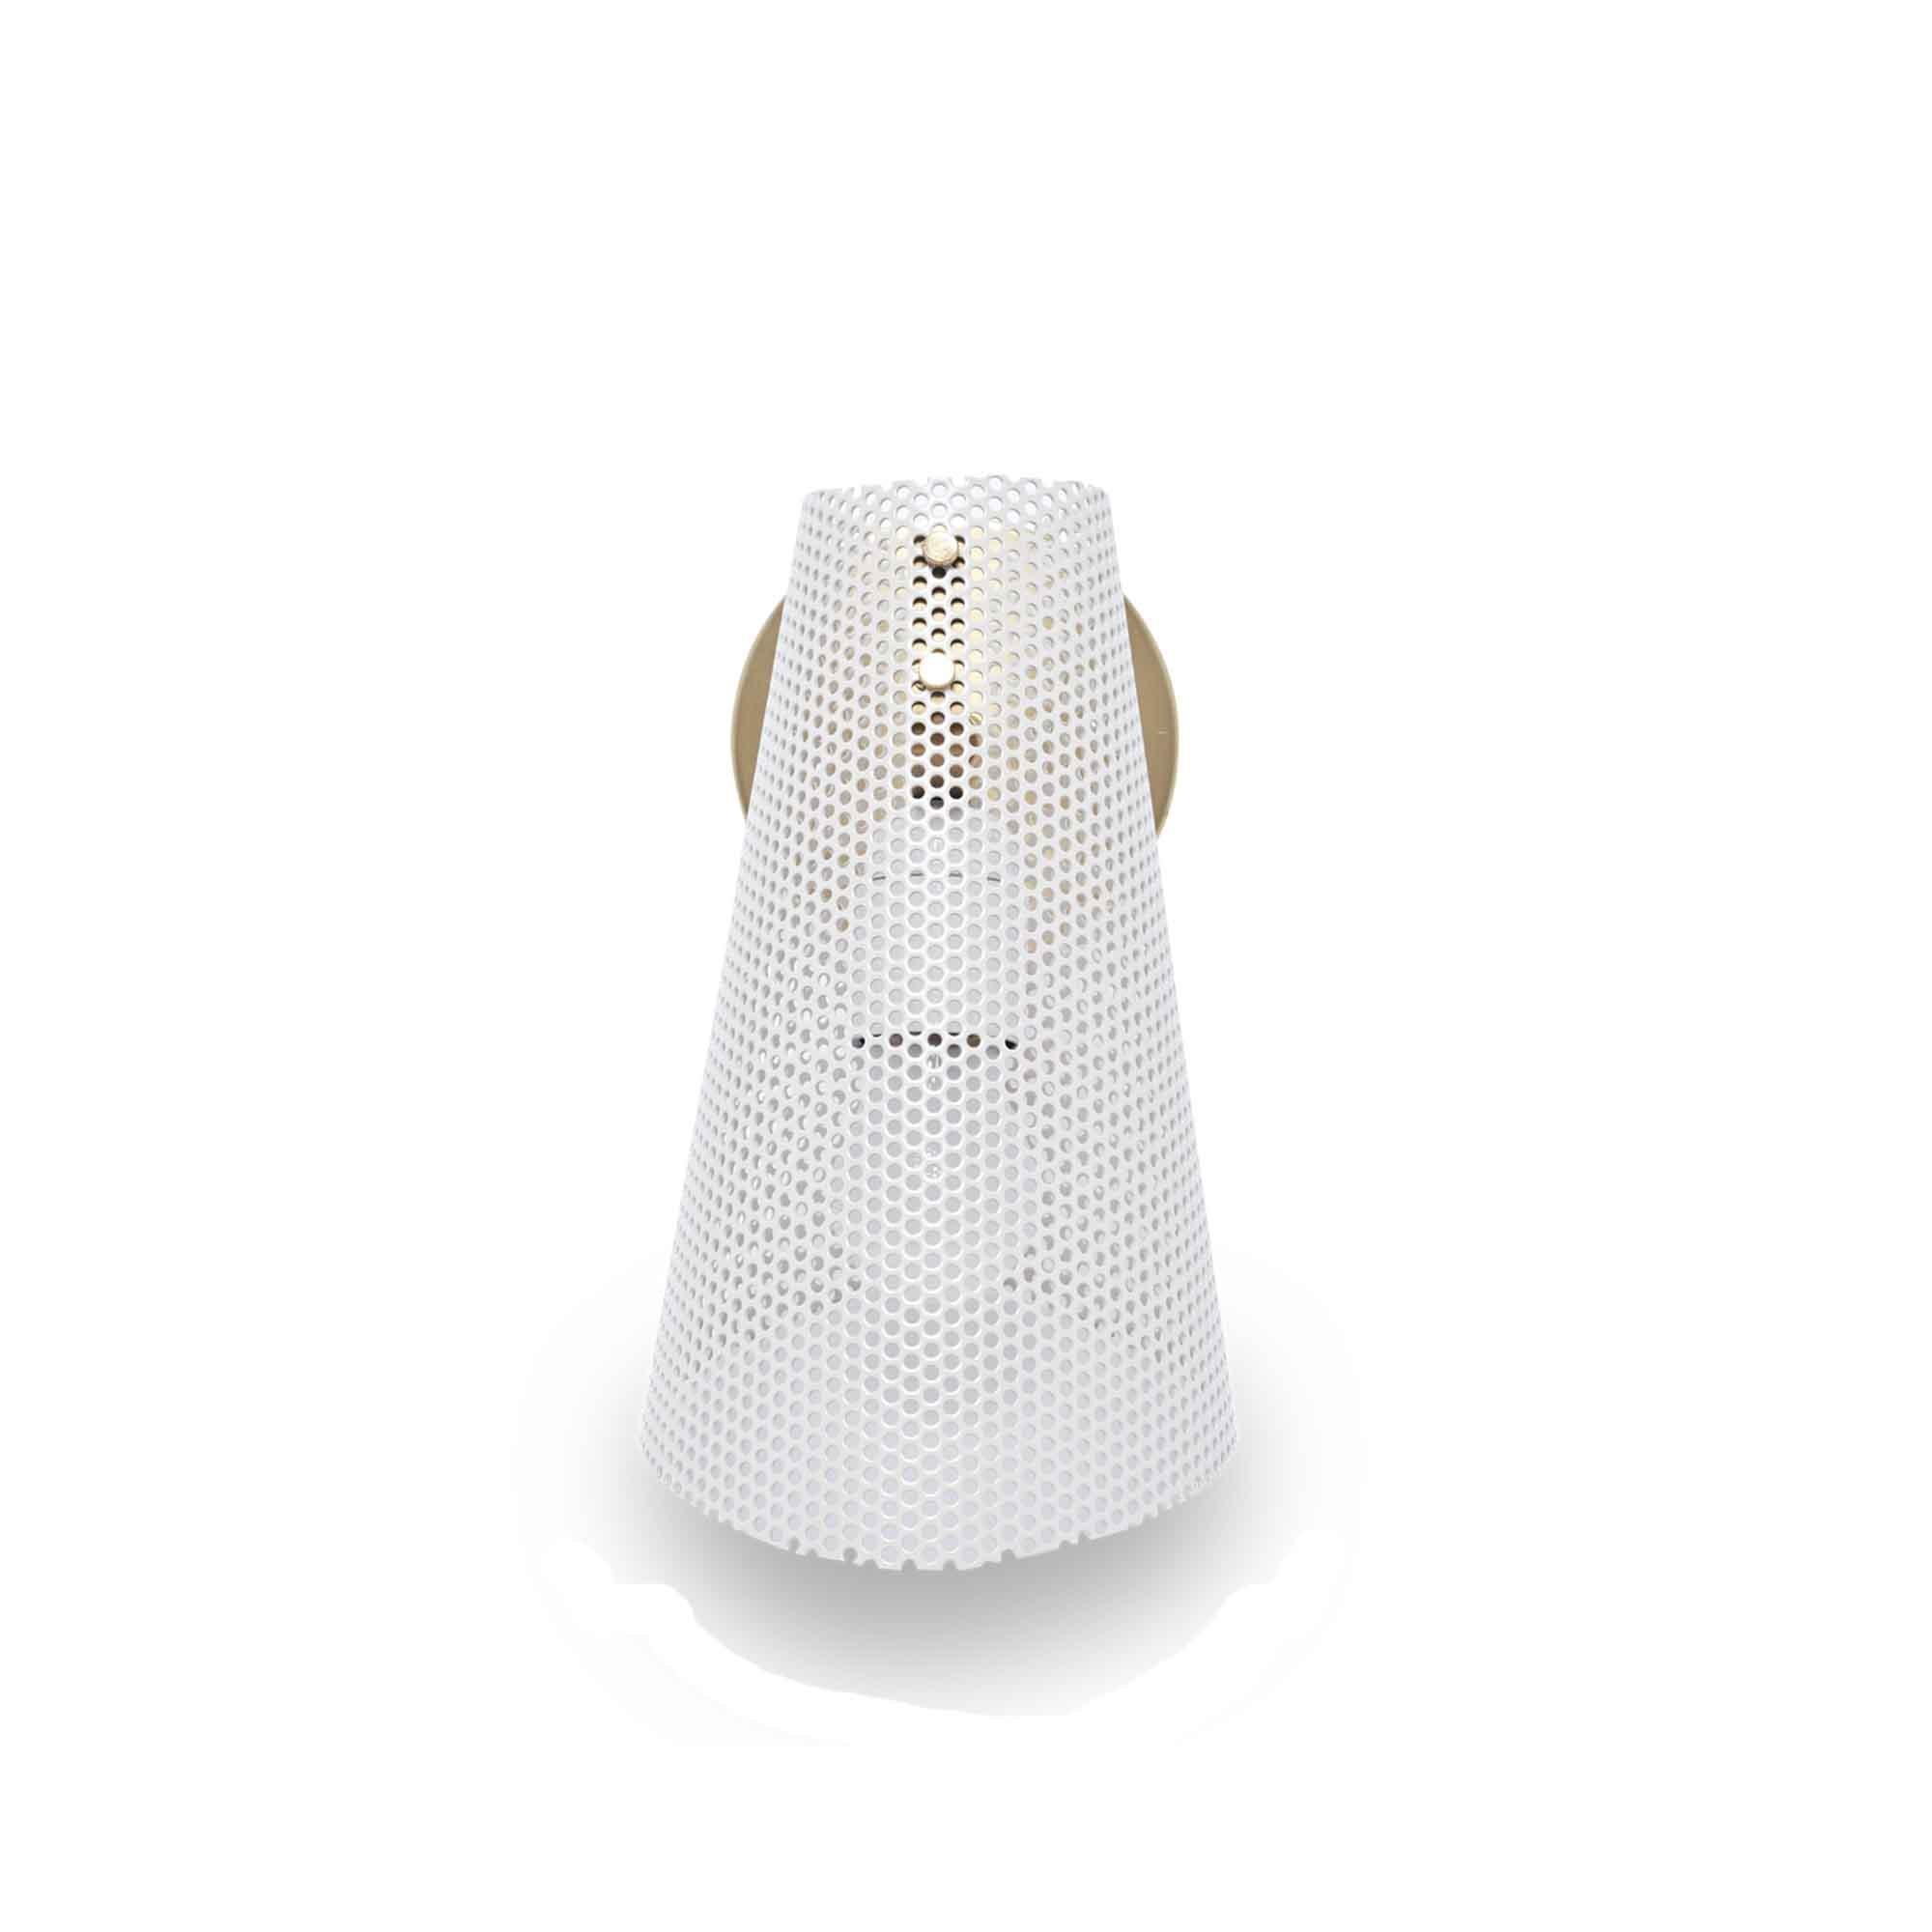 White perforated scoop sconce by Lawson-Fenning. The scoop perforated sconce features a perforated shade and brass hardware.

The Lawson-Fenning Collection is designed and handmade in Los Angeles, California. Reach out to discover what options are